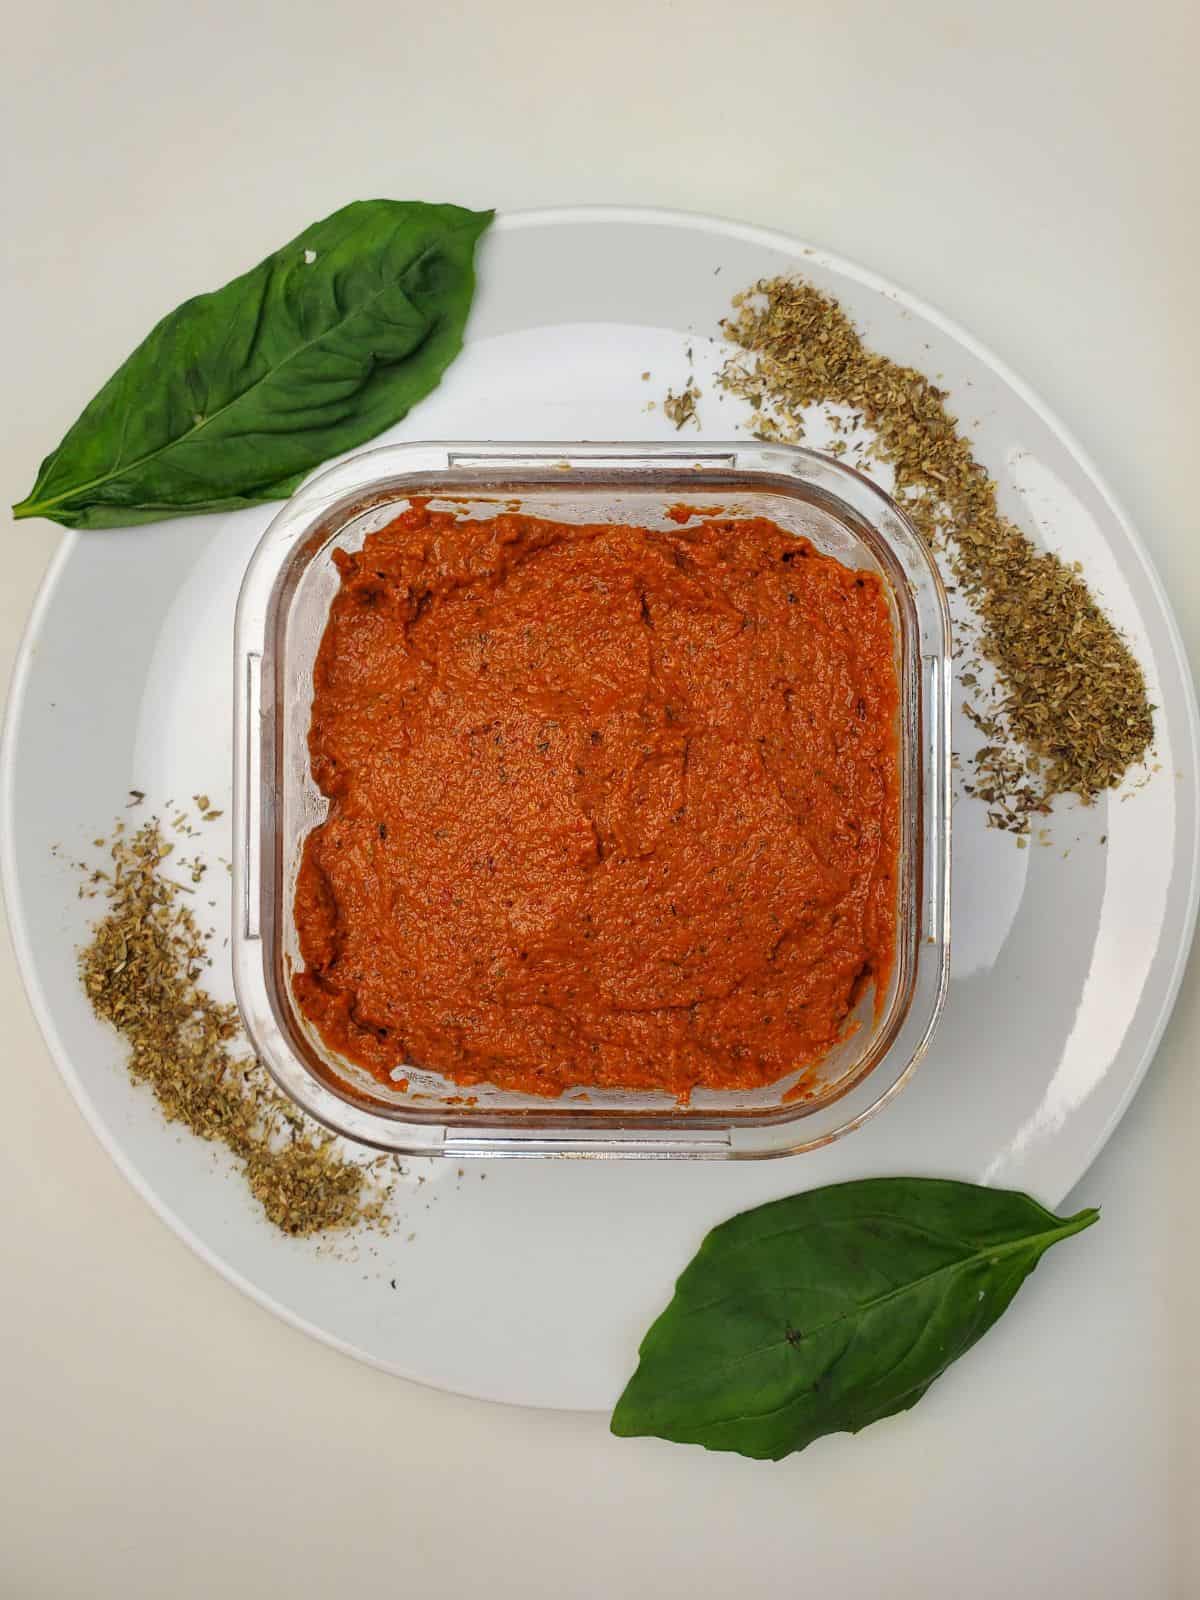 red pepper nomato sauce in a glass container